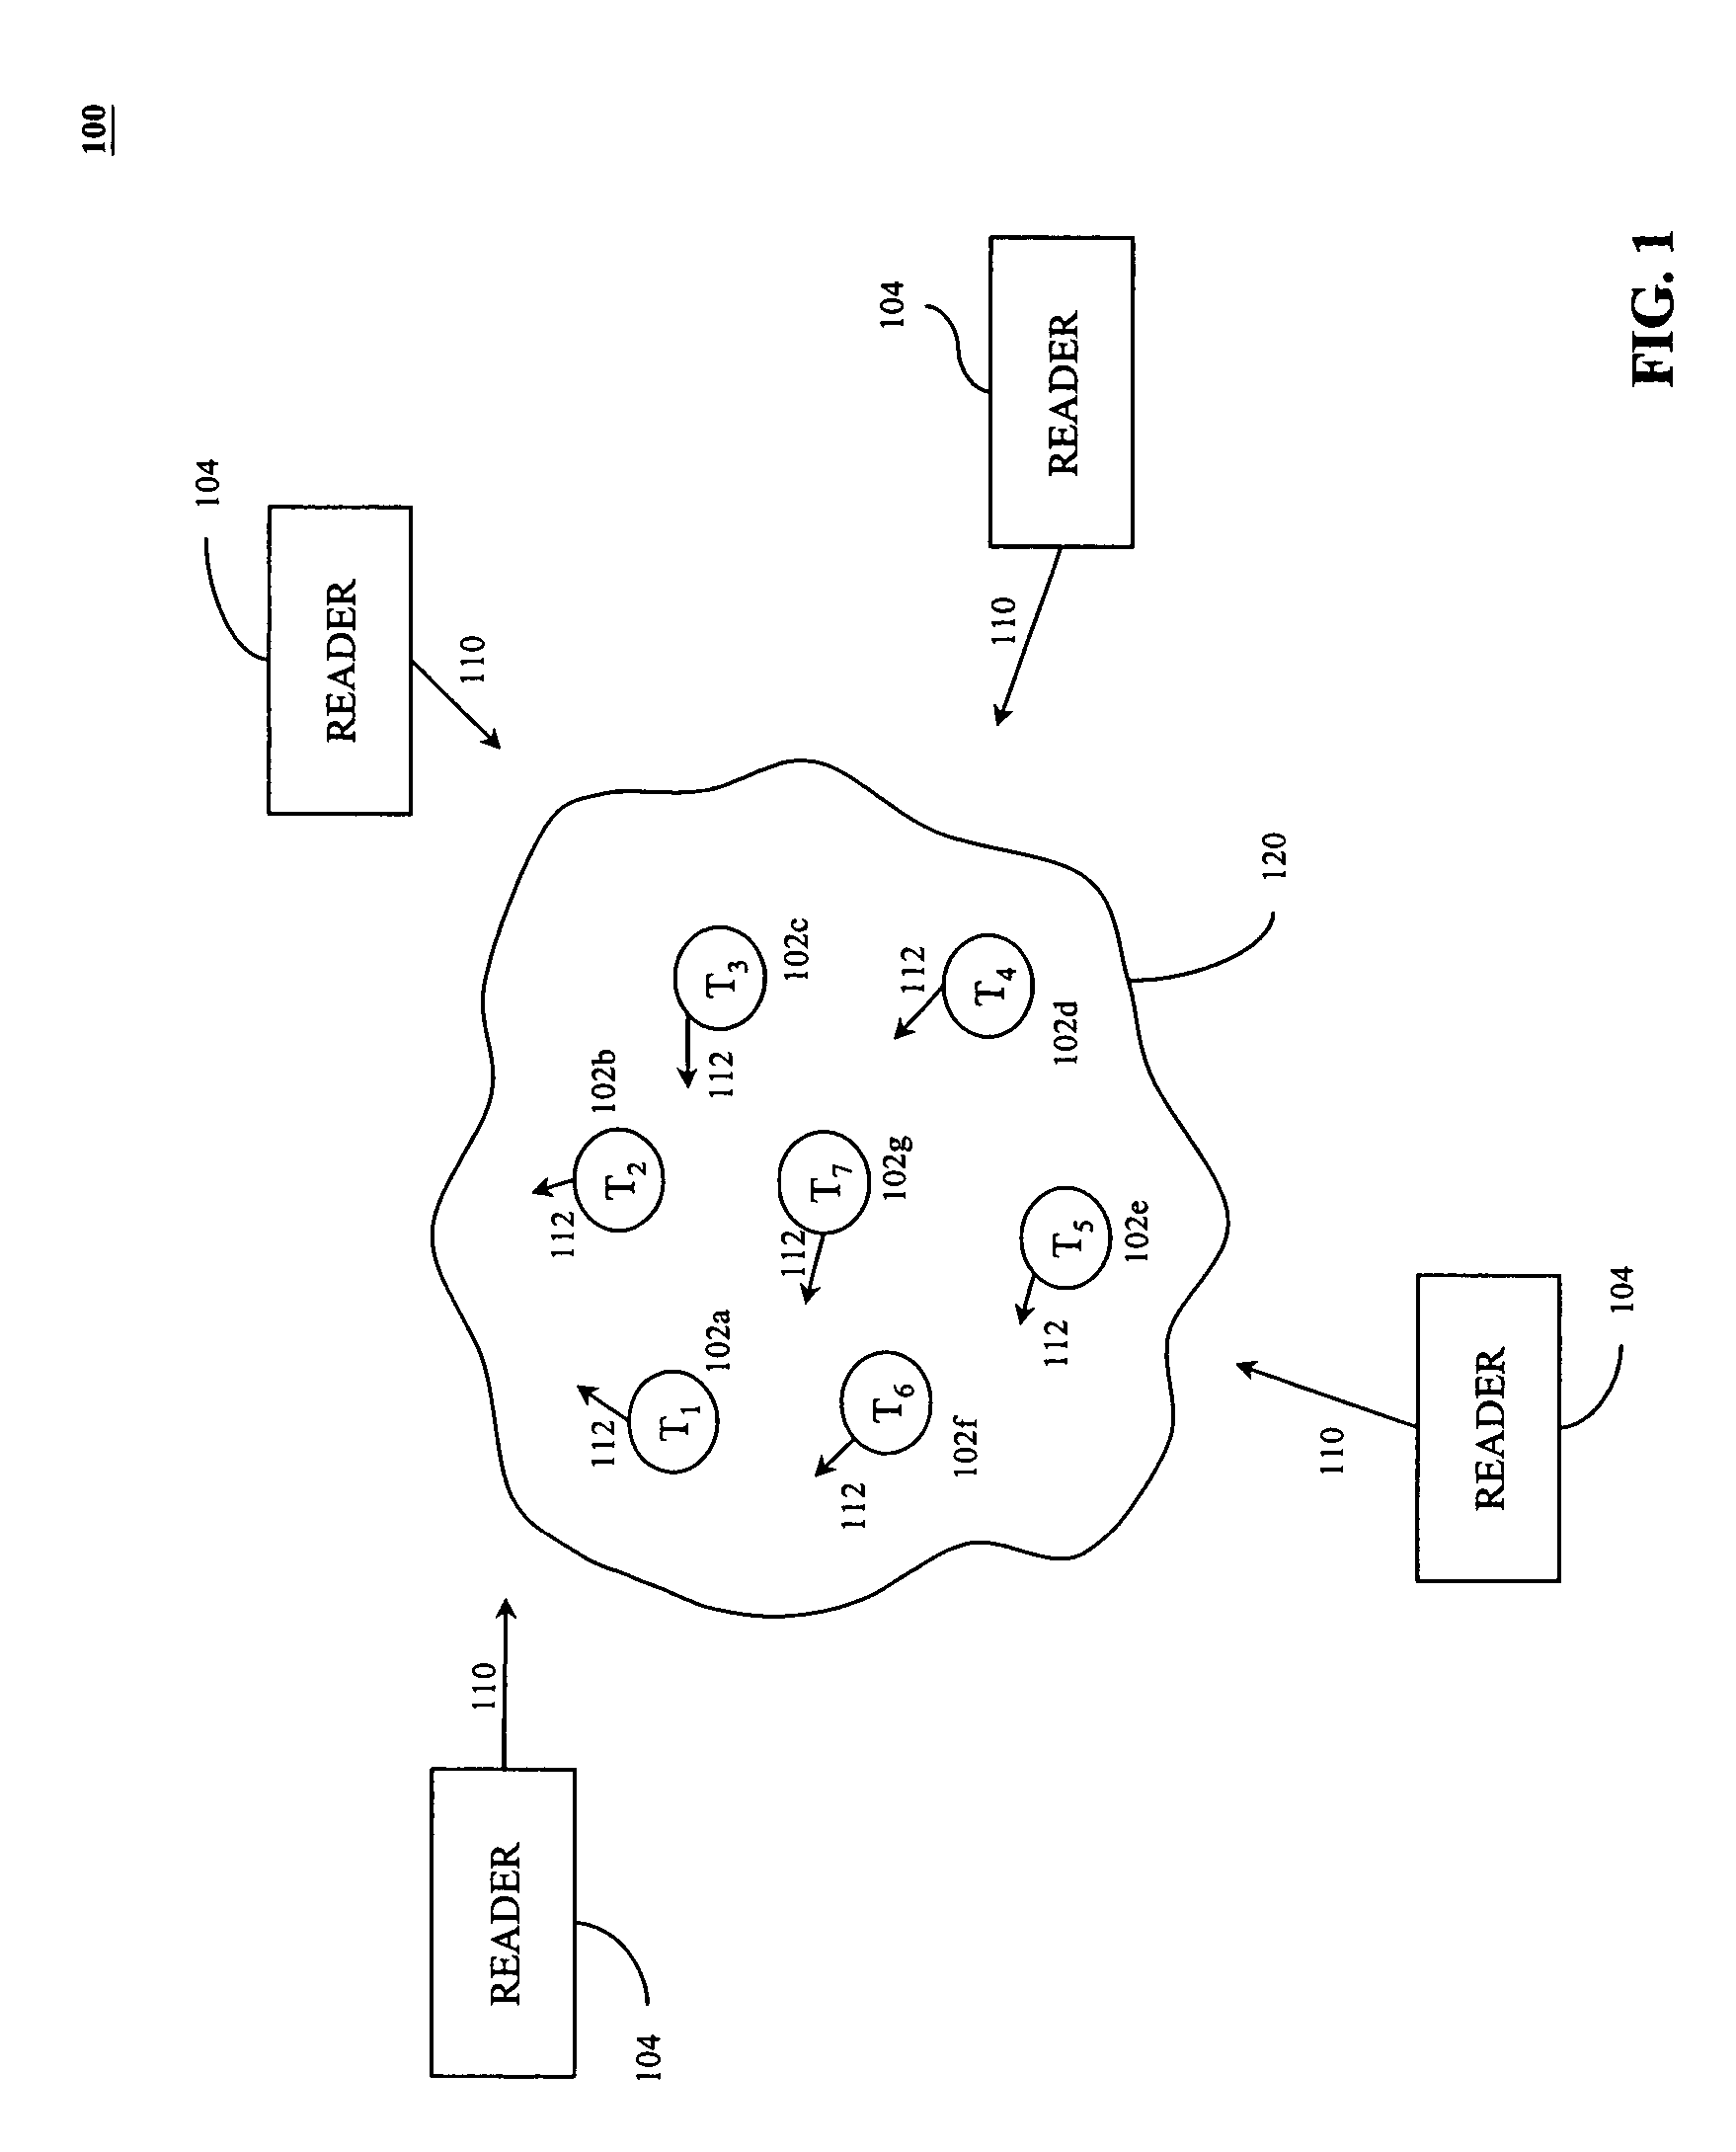 Method for the efficient reading of a population of radio frequency identification tags with unique identification numbers over a noisy air channel